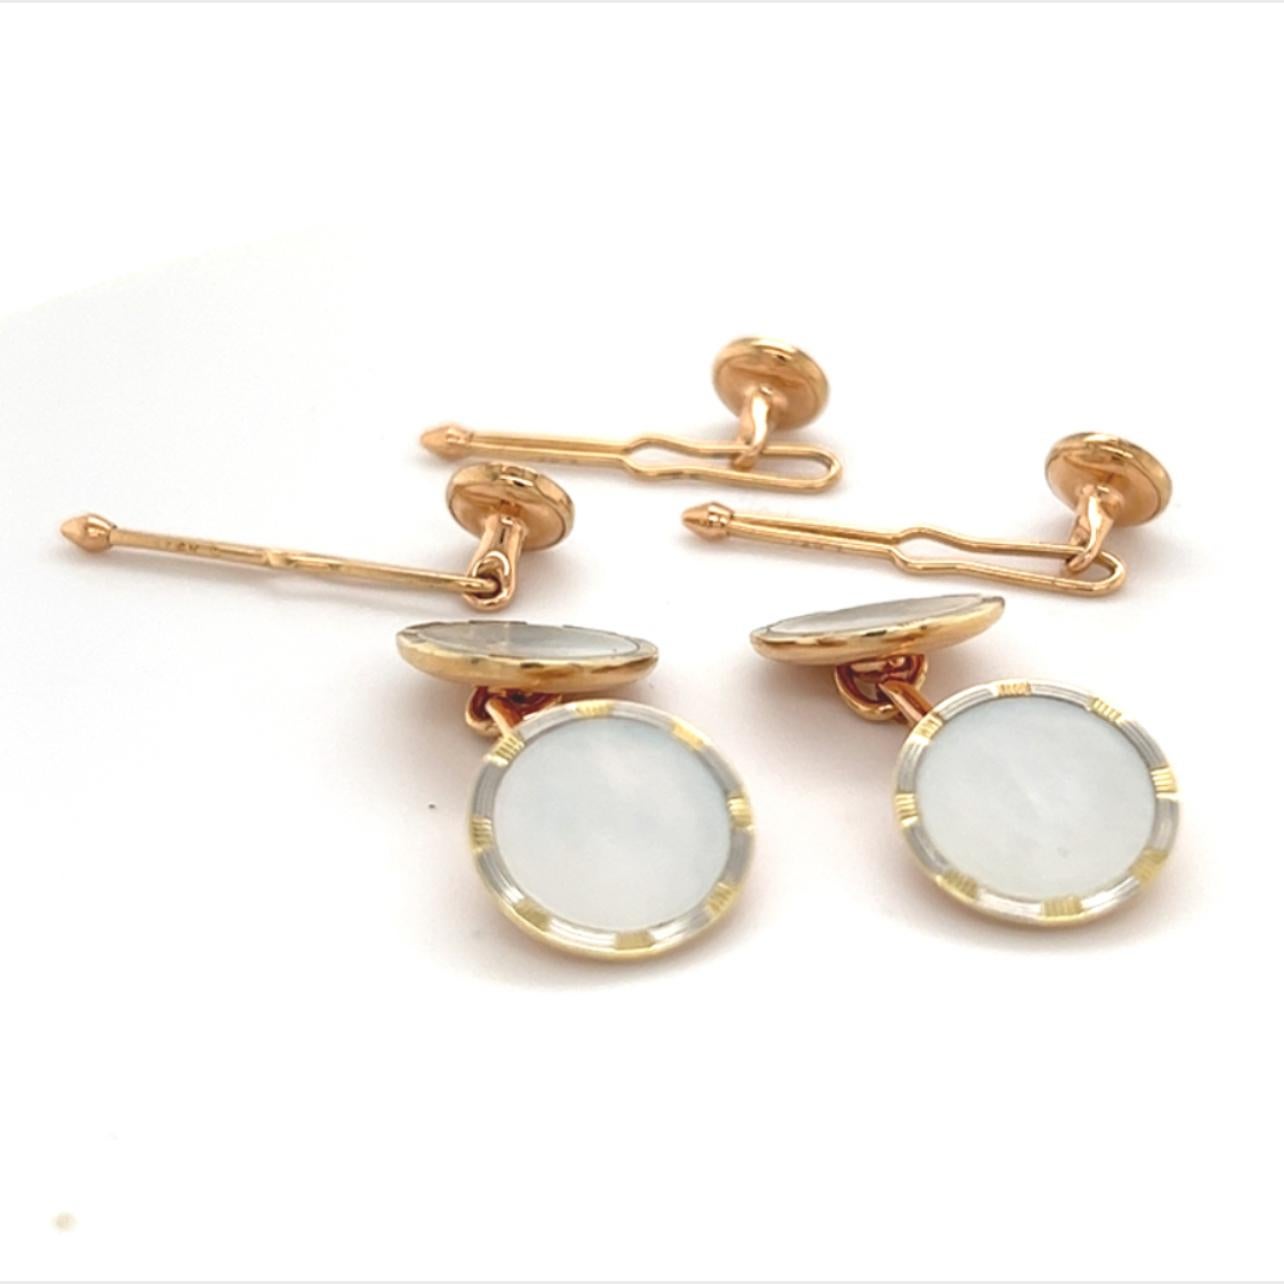 Estate Mother of Pearl Cufflinks Tuxedo Set 14k Gold 11.5 mm Certified $2,950 211199

Magnificent estate condition newly polished looks like new.

TRUSTED SELLER SINCE 2002

PLEASE SEE OUR HUNDREDS OF POSITIVE FEEDBACKS FROM OUR CLIENTS!!

FREE